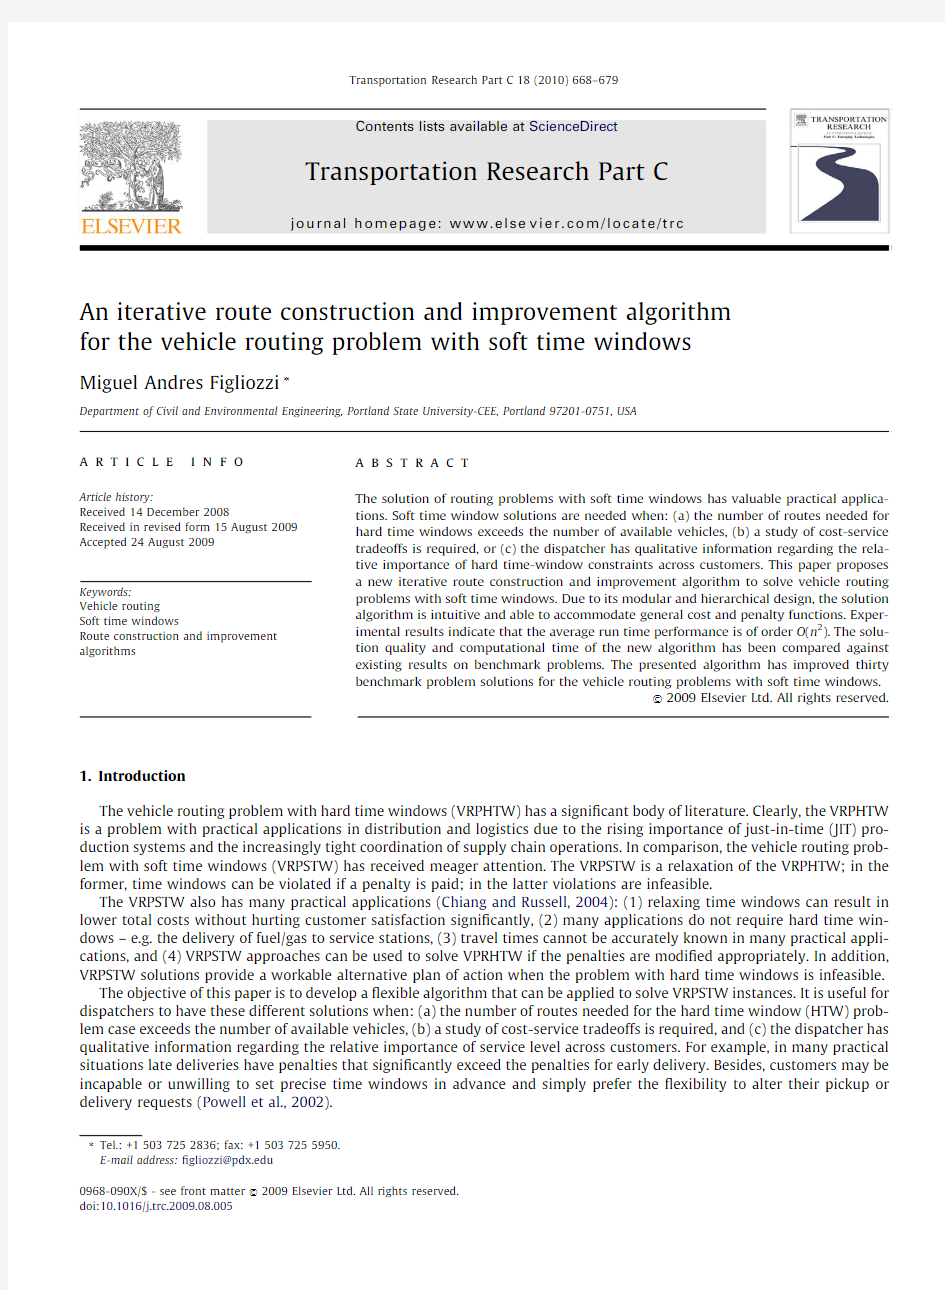 An-iterative-route-construction-and-improvement-algorithm-for-the-vehicle-routing-problem